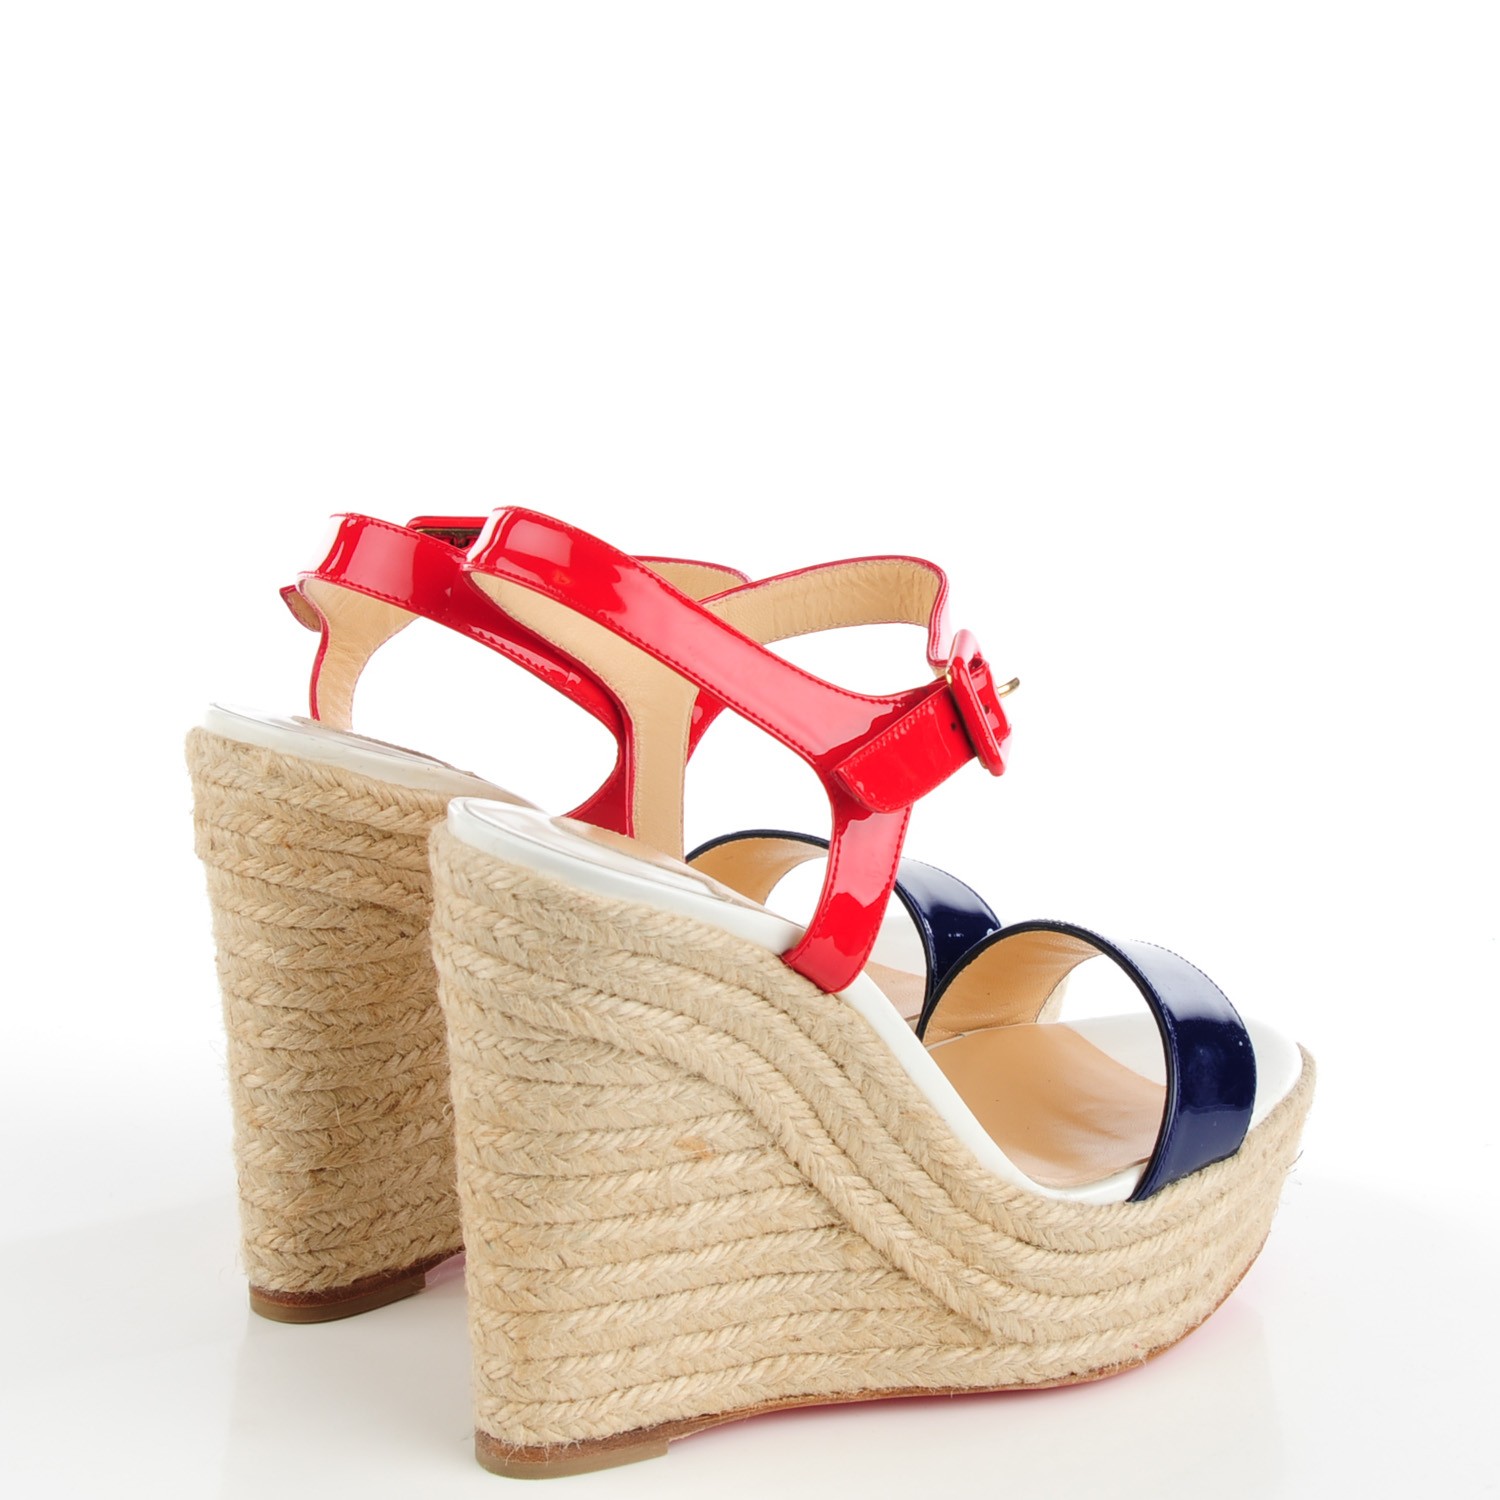 red and white wedges